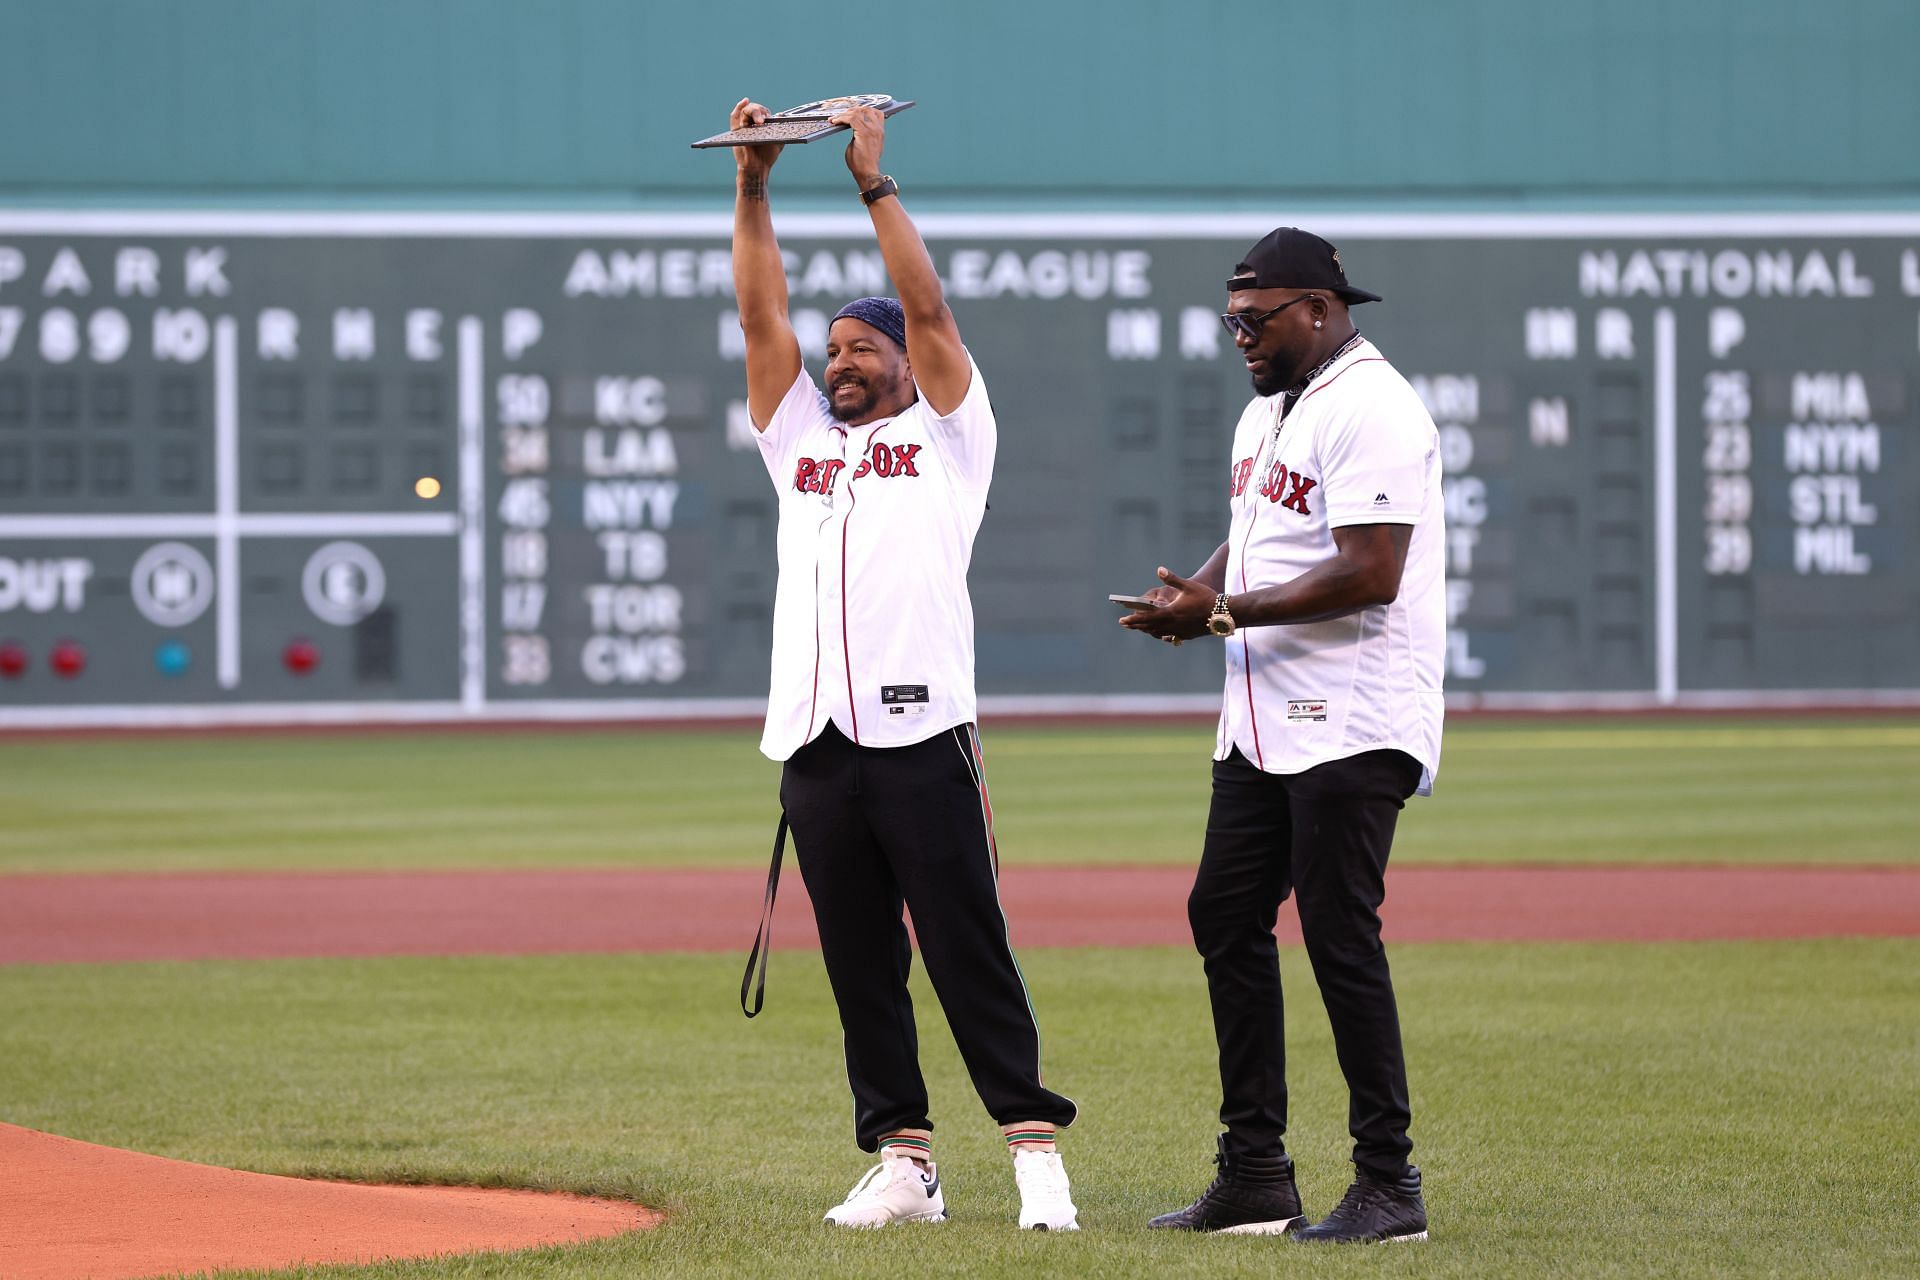 Gallery: Red Sox hall of famer Manny Ramirez honored with teammate David  Ortiz – Boston Herald